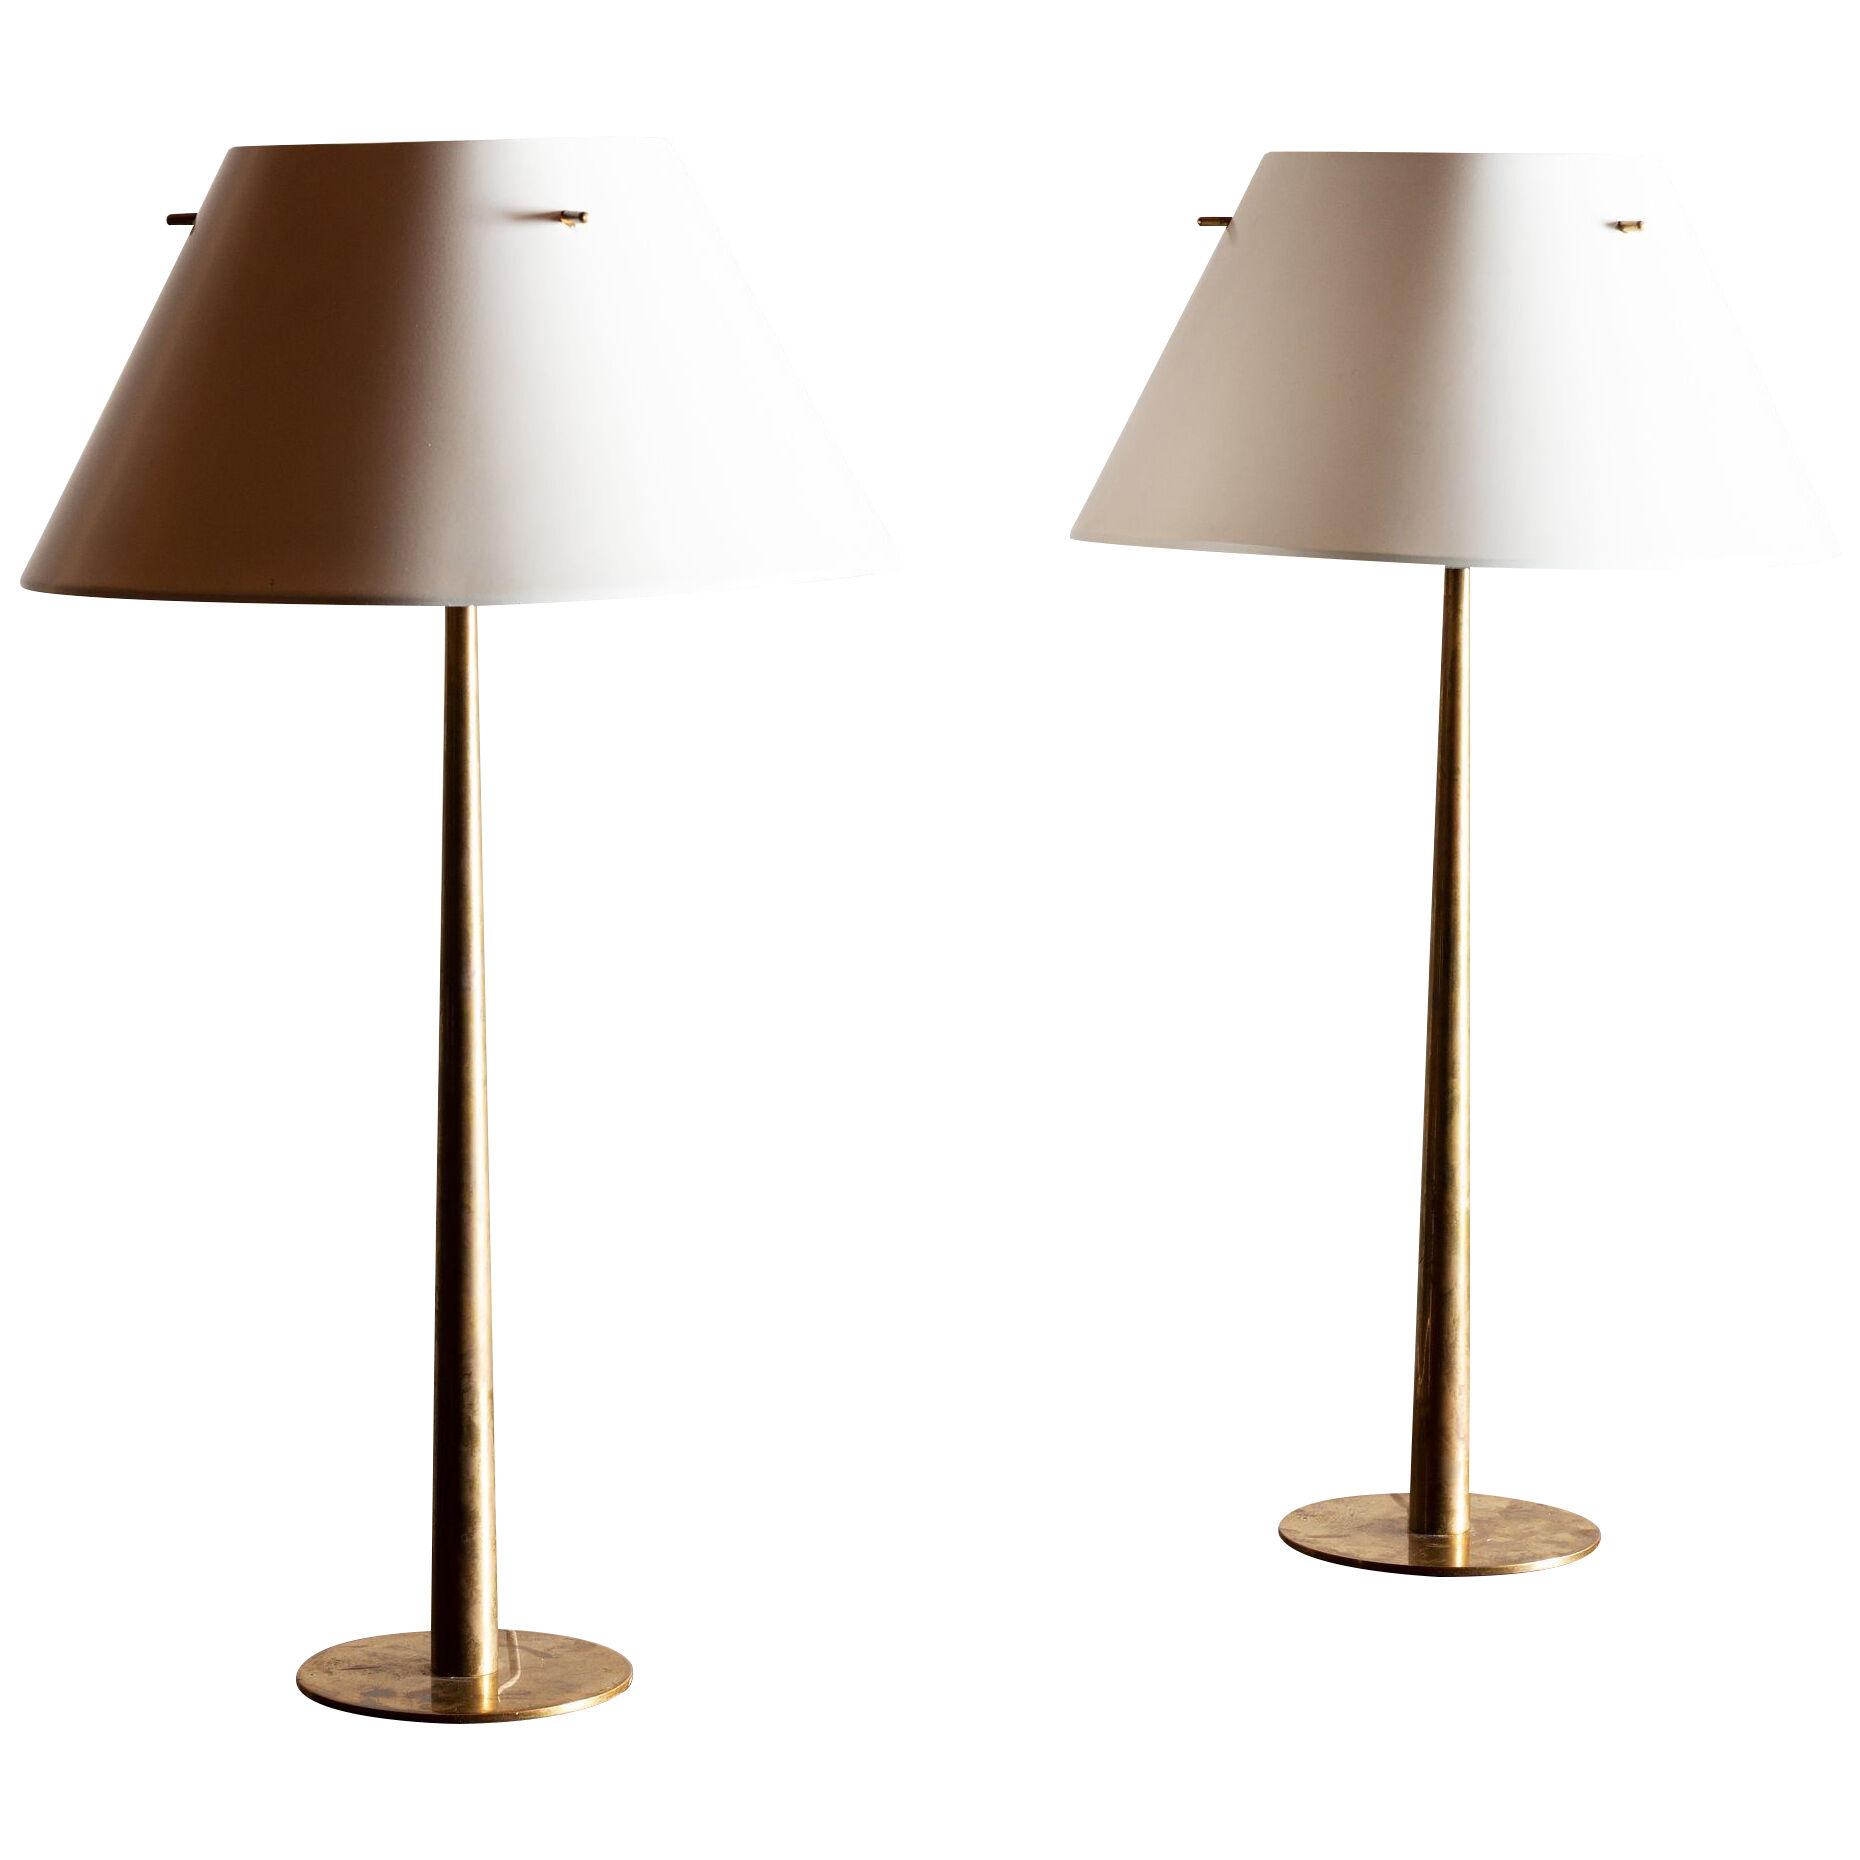 Brass Table Lamps by Hans-Agne Jakobsson for AB Markaryd, Sweden, 1950s